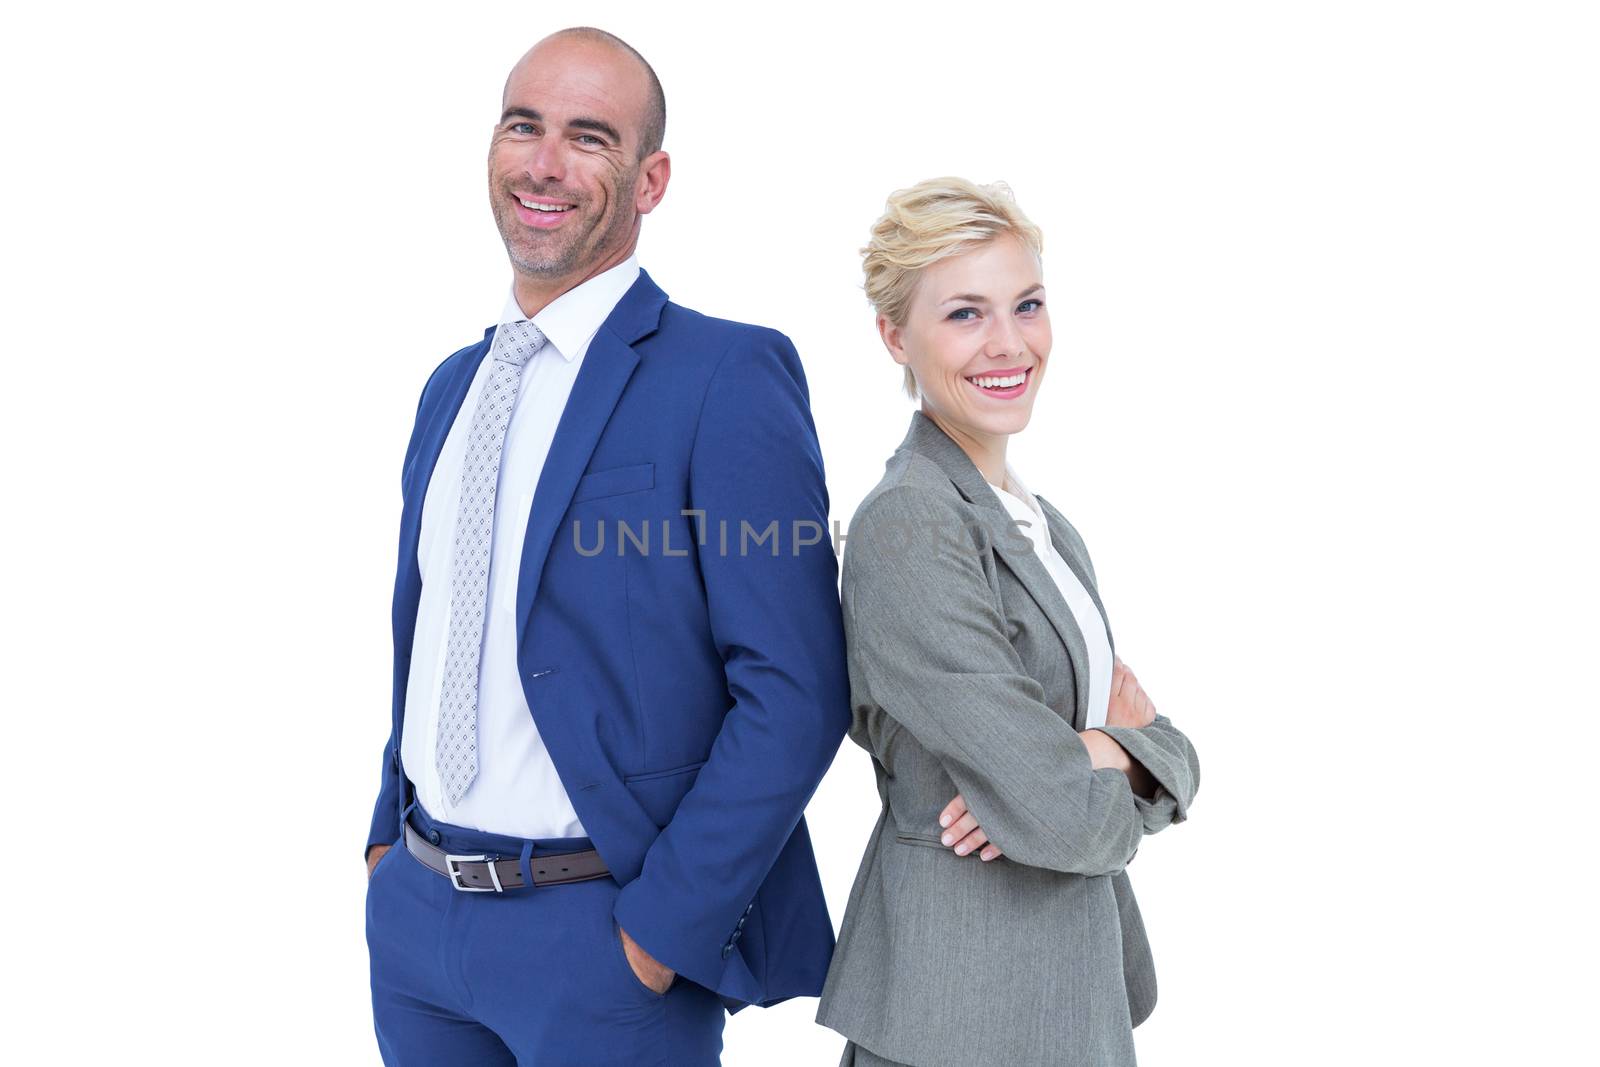 Smiling business people back-to-back by Wavebreakmedia